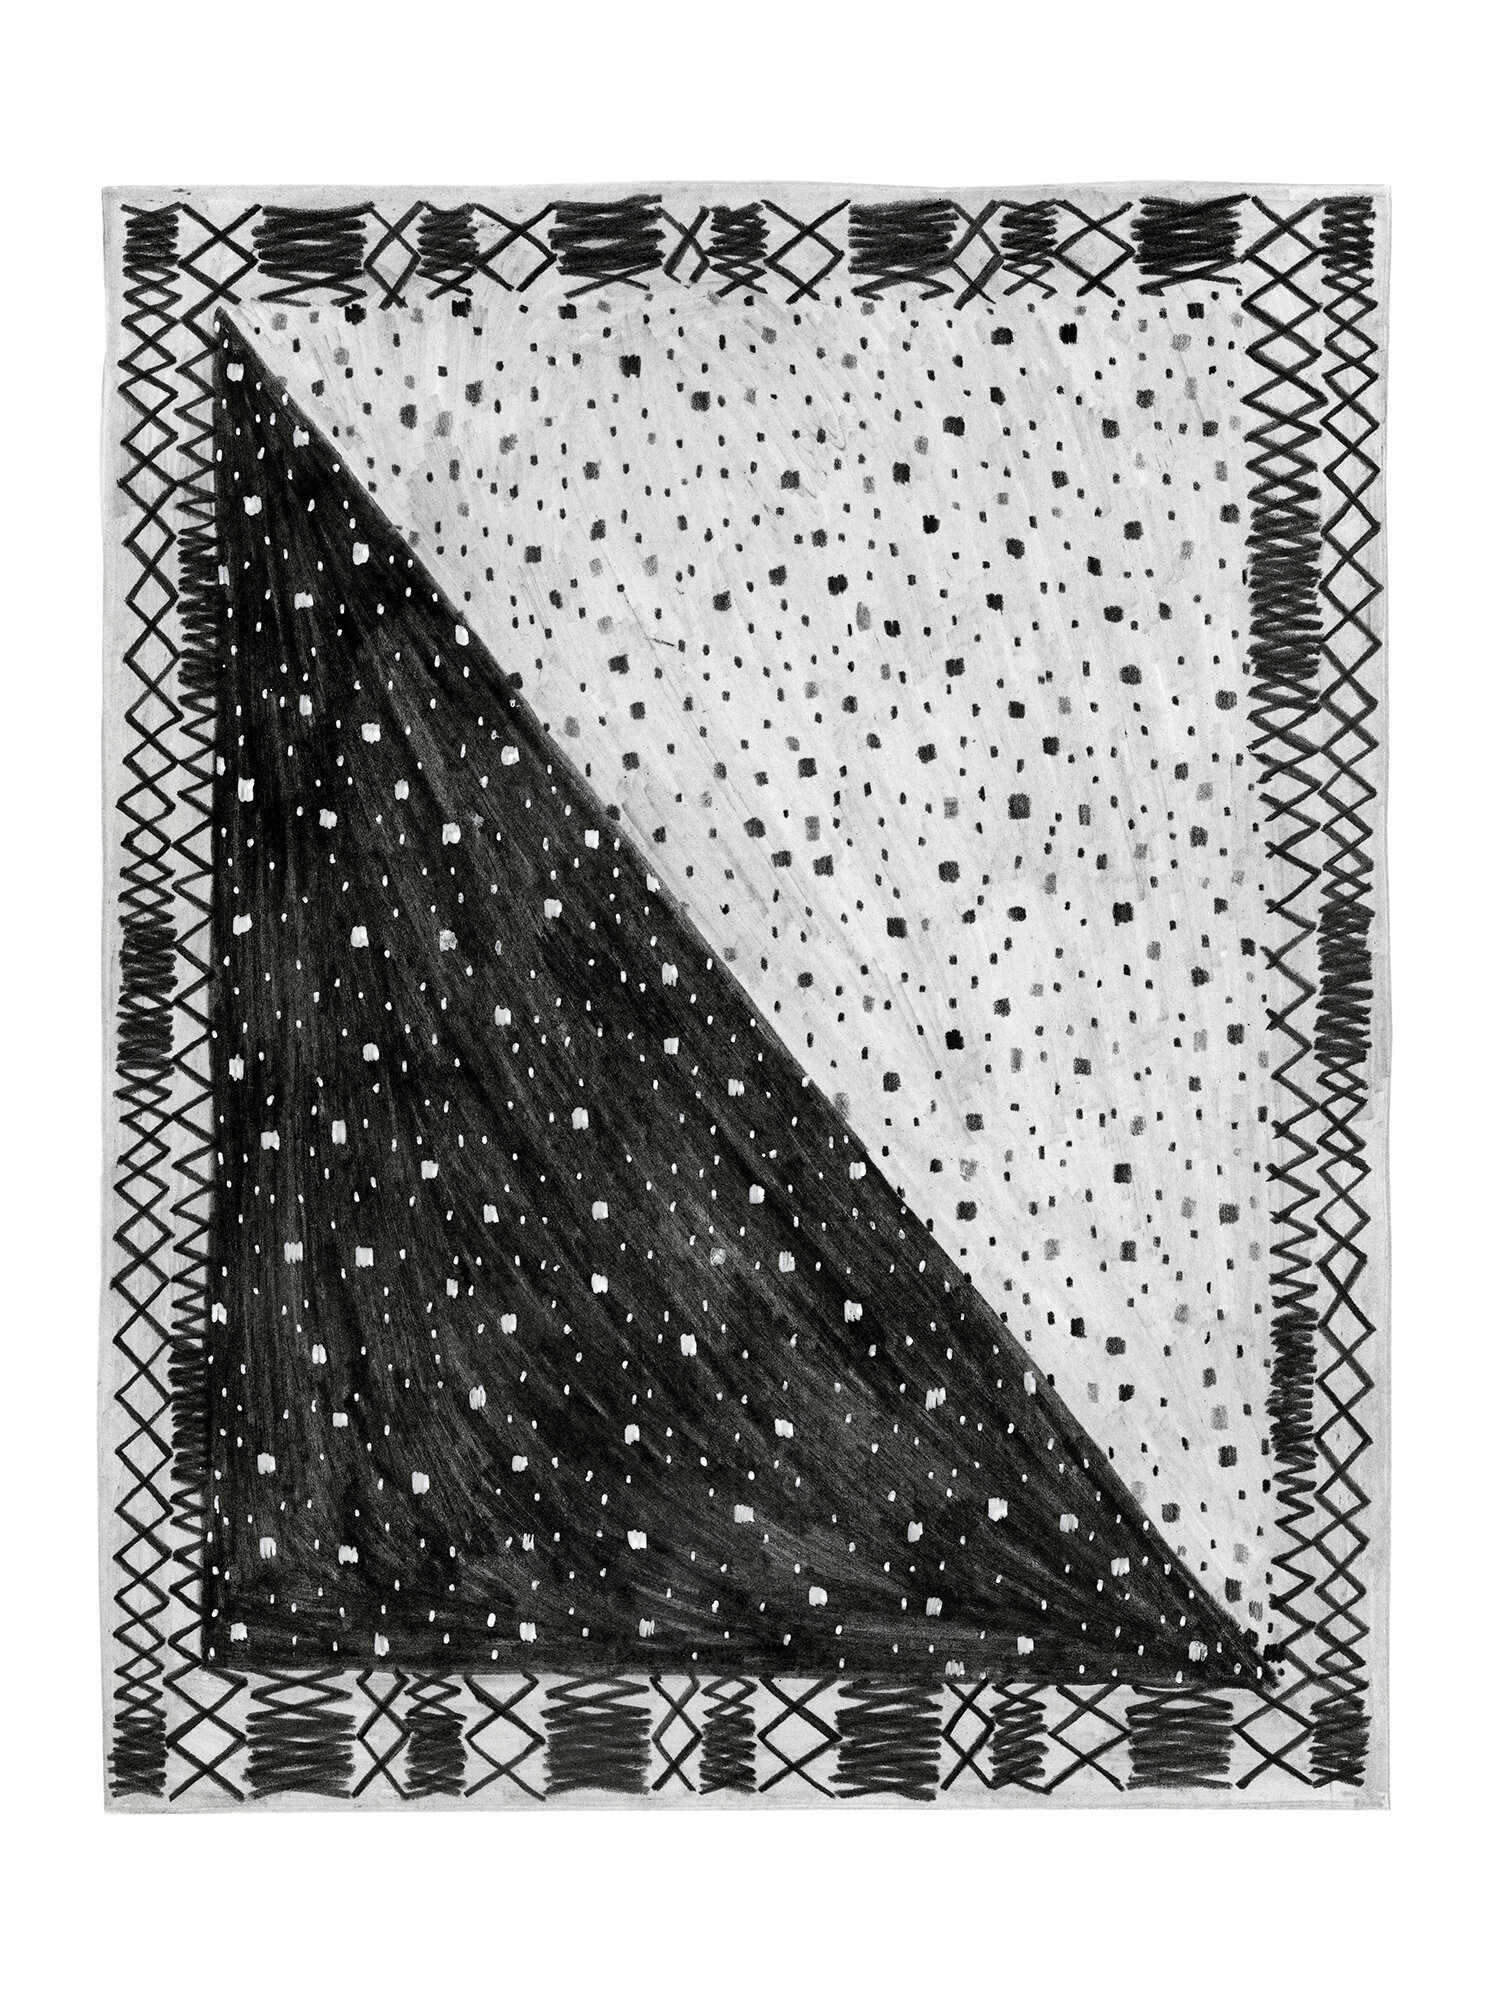   Dark &amp; Lights Stars  on Zig-Zags Rug   Pencil on paper 12 x 9 inches   